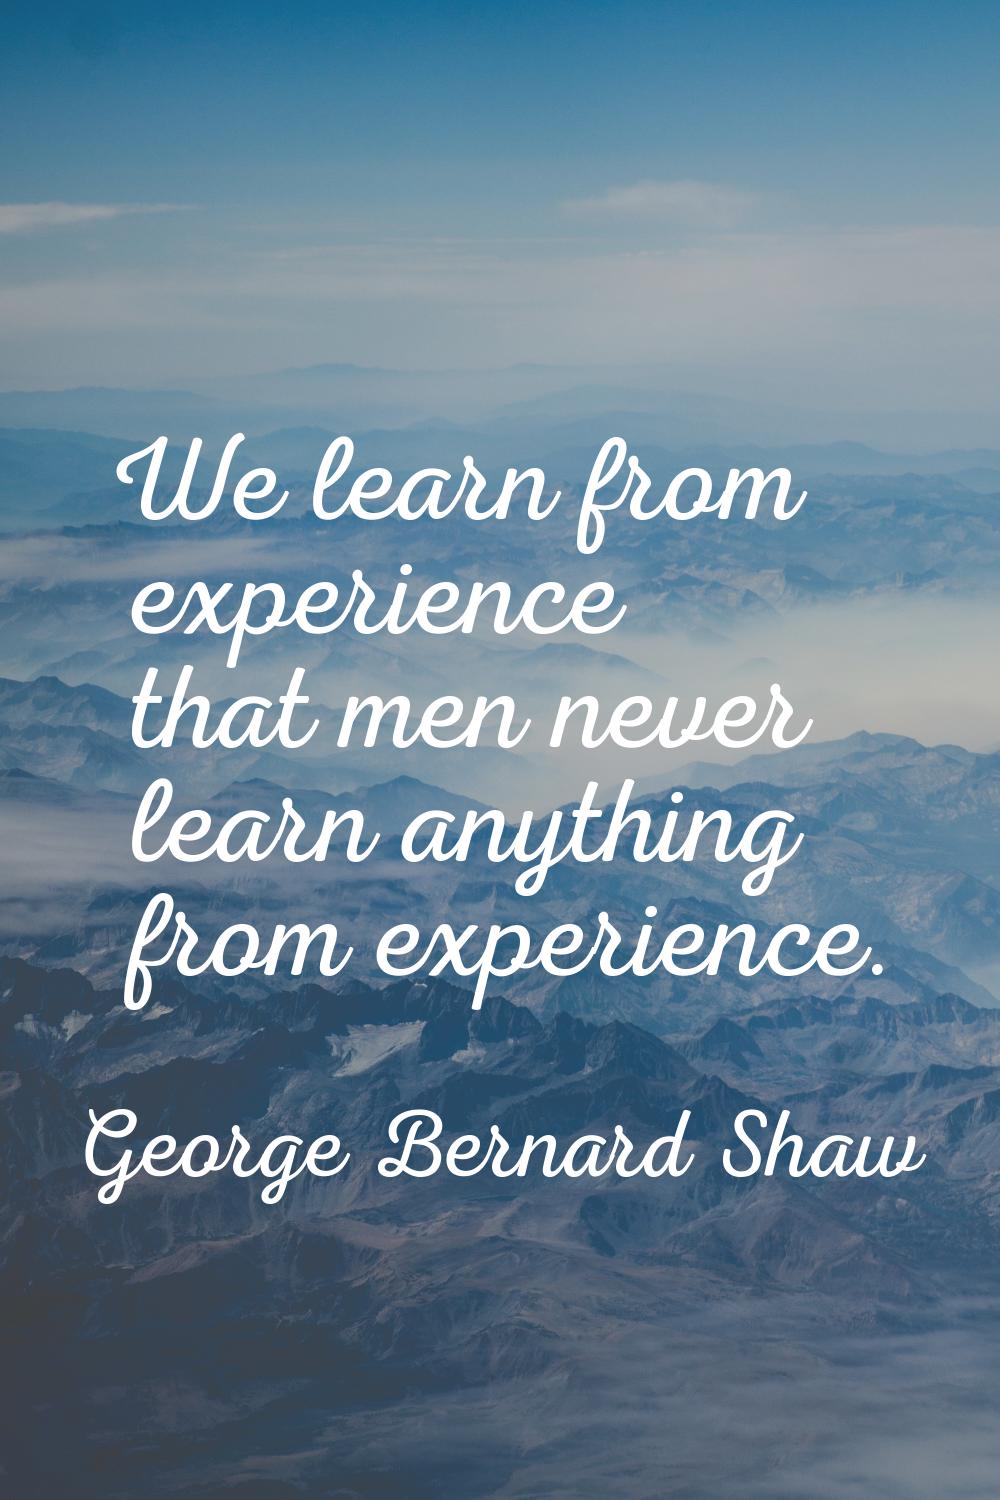 We learn from experience that men never learn anything from experience.